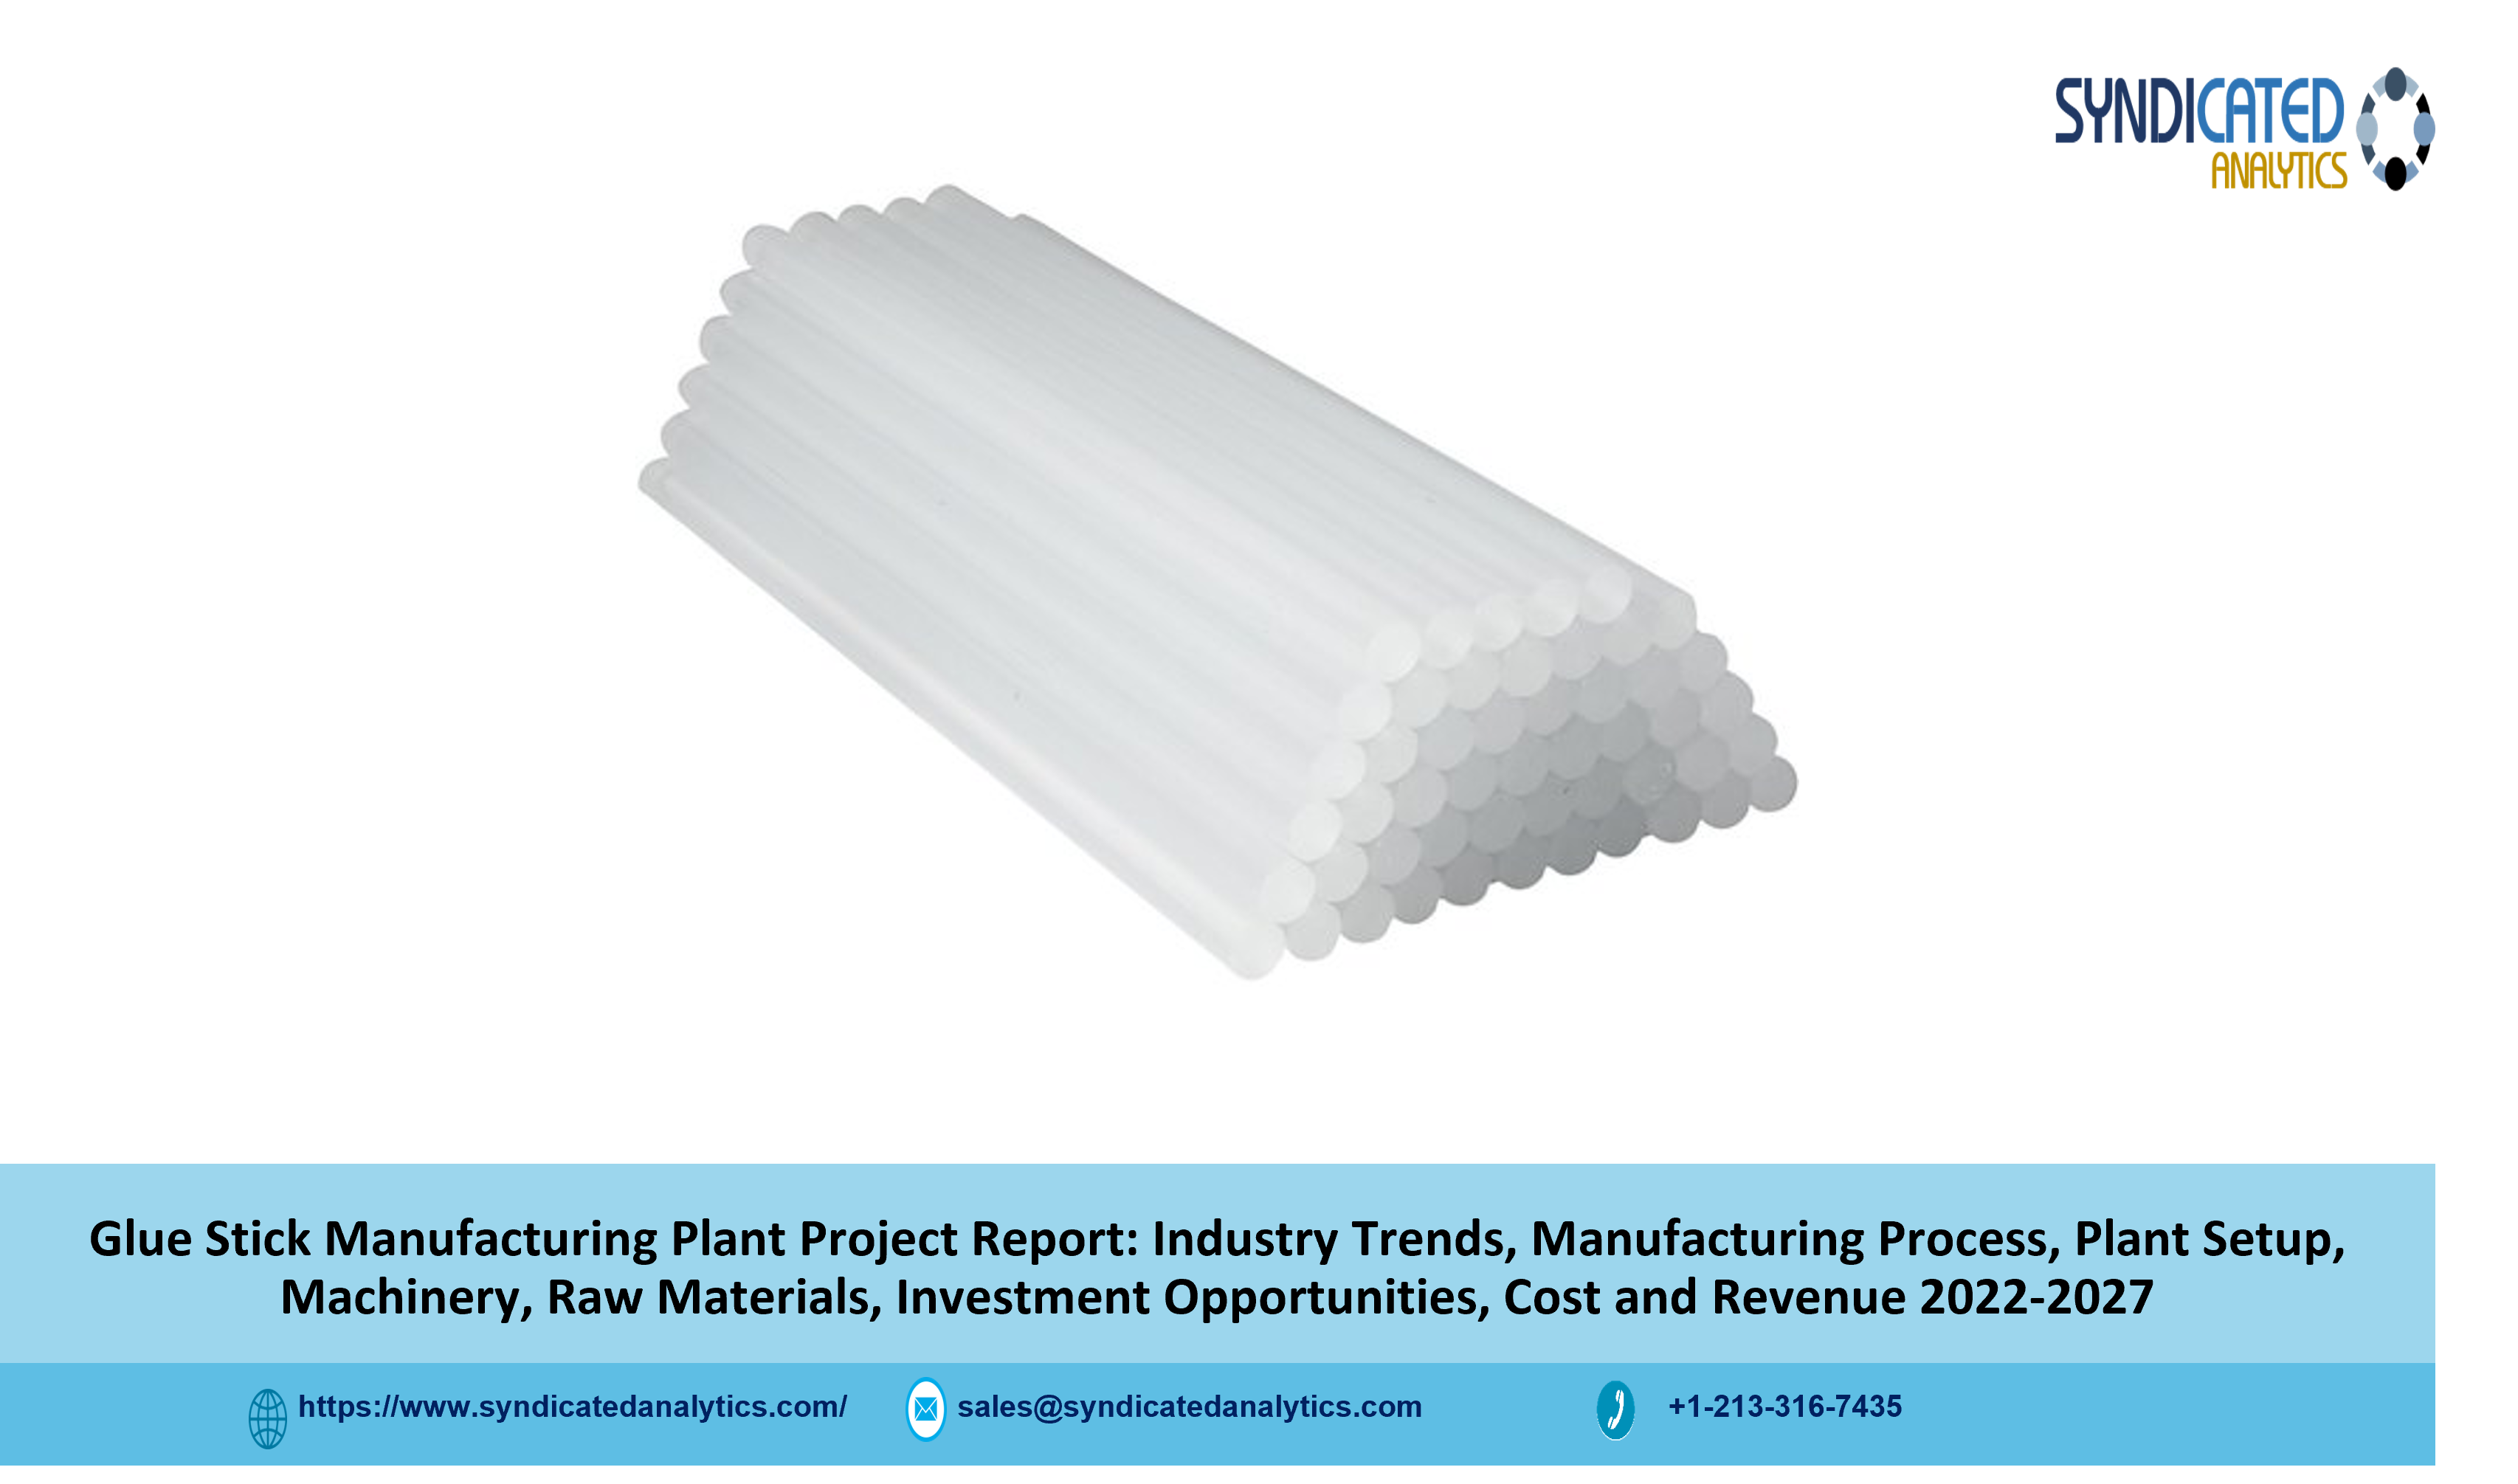 Glue Stick Manufacturing Plant Project Report